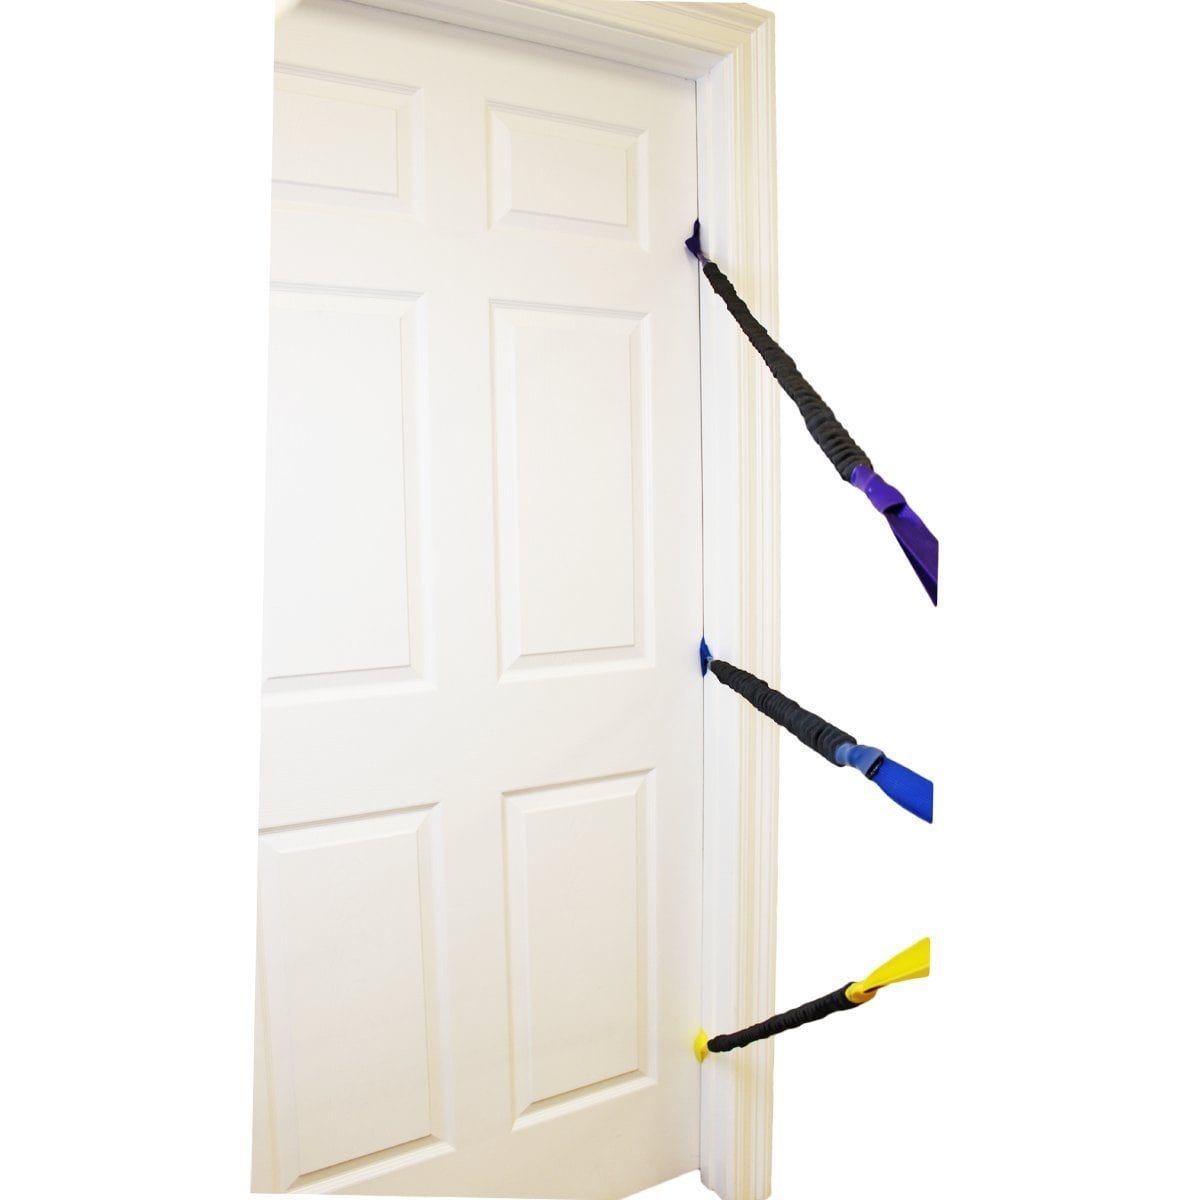 Door anchored physical therapy band resistance bands for rehabilitation